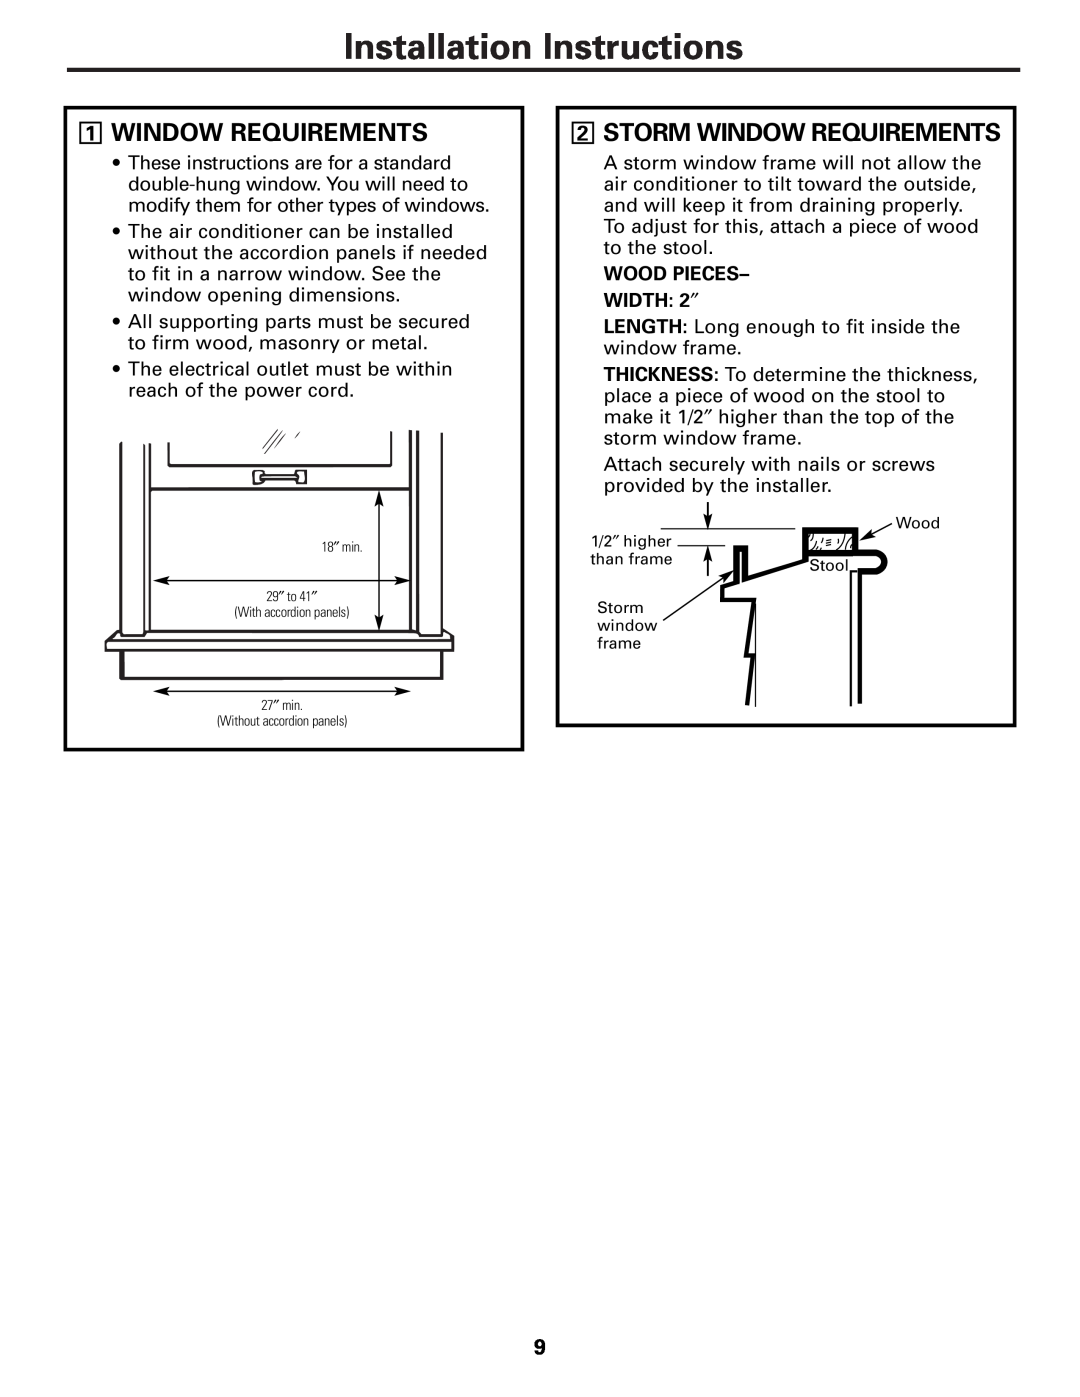 GE ASD06* 1WINDOW REQUIREMENTS, 2STORM WINDOW REQUIREMENTS, Installation Instructions, WOOD PIECES- WIDTH 2″ 